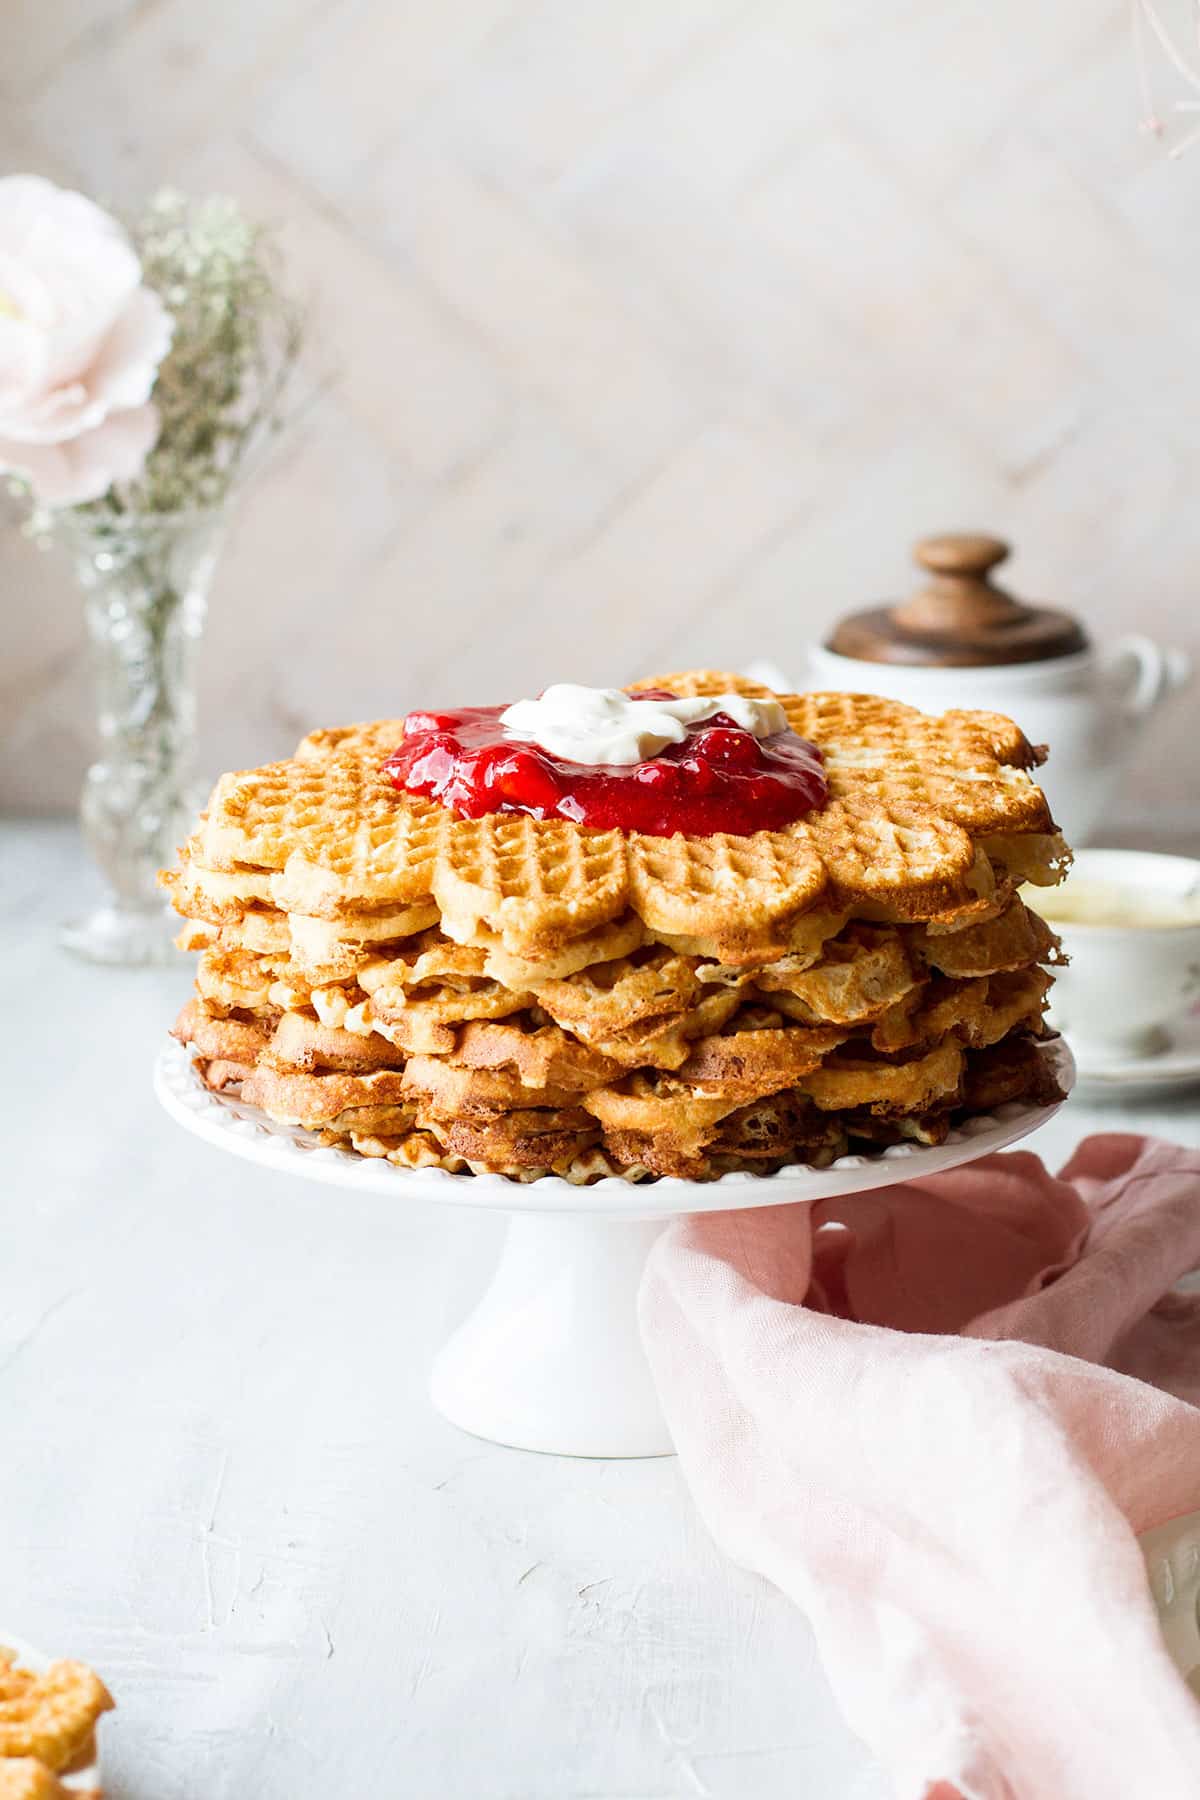 A tall stack of waffles on a cake stand, topped with strawberry jam and sour cream.